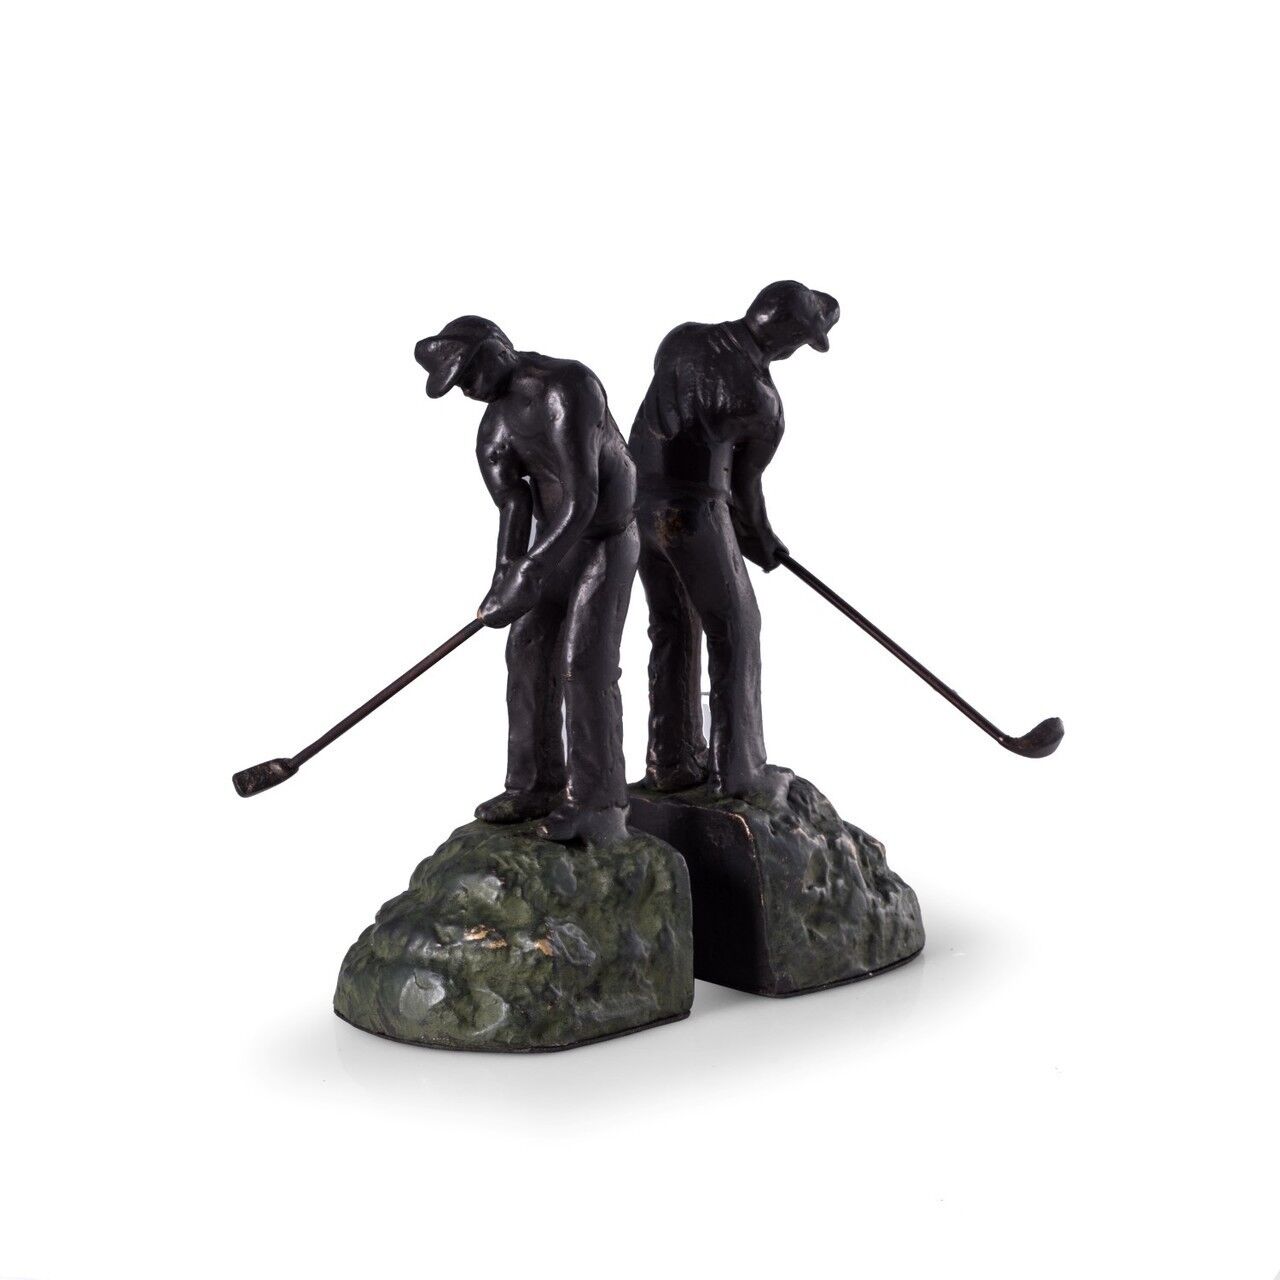 Paloma Collection AJ-R19G Cast Metal Golfer Bookends with Finish Patina GORĄCE, nowe